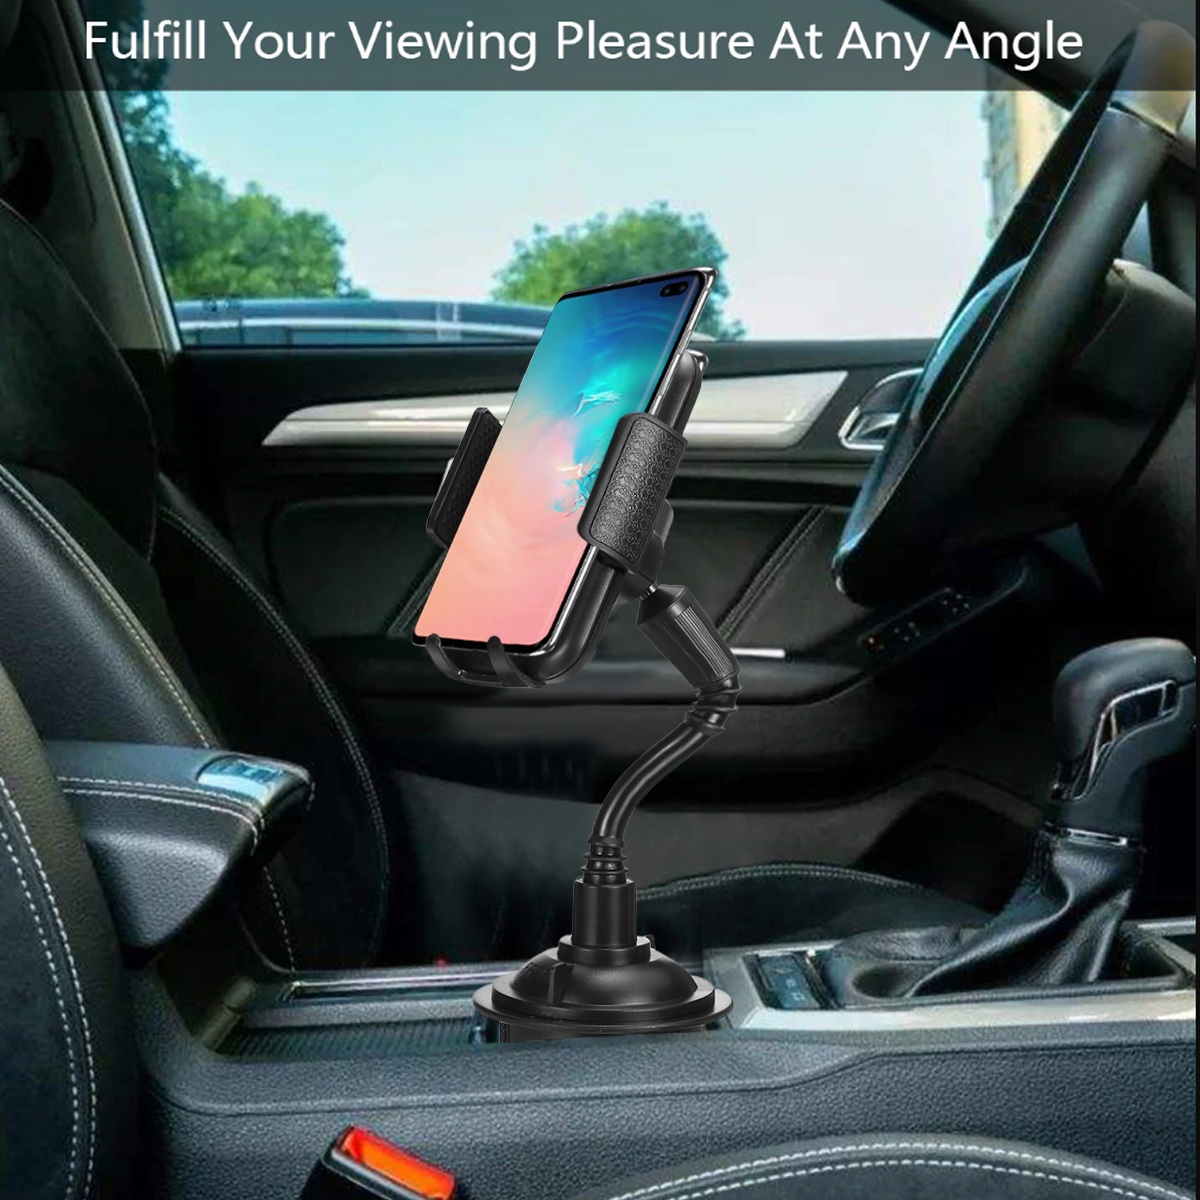 Universal-360deg-Car-Cup-Holder-Stand-Cradle-Car-Phone-Holder-For-30-65-Inch-Smart-Phone-1608754-2